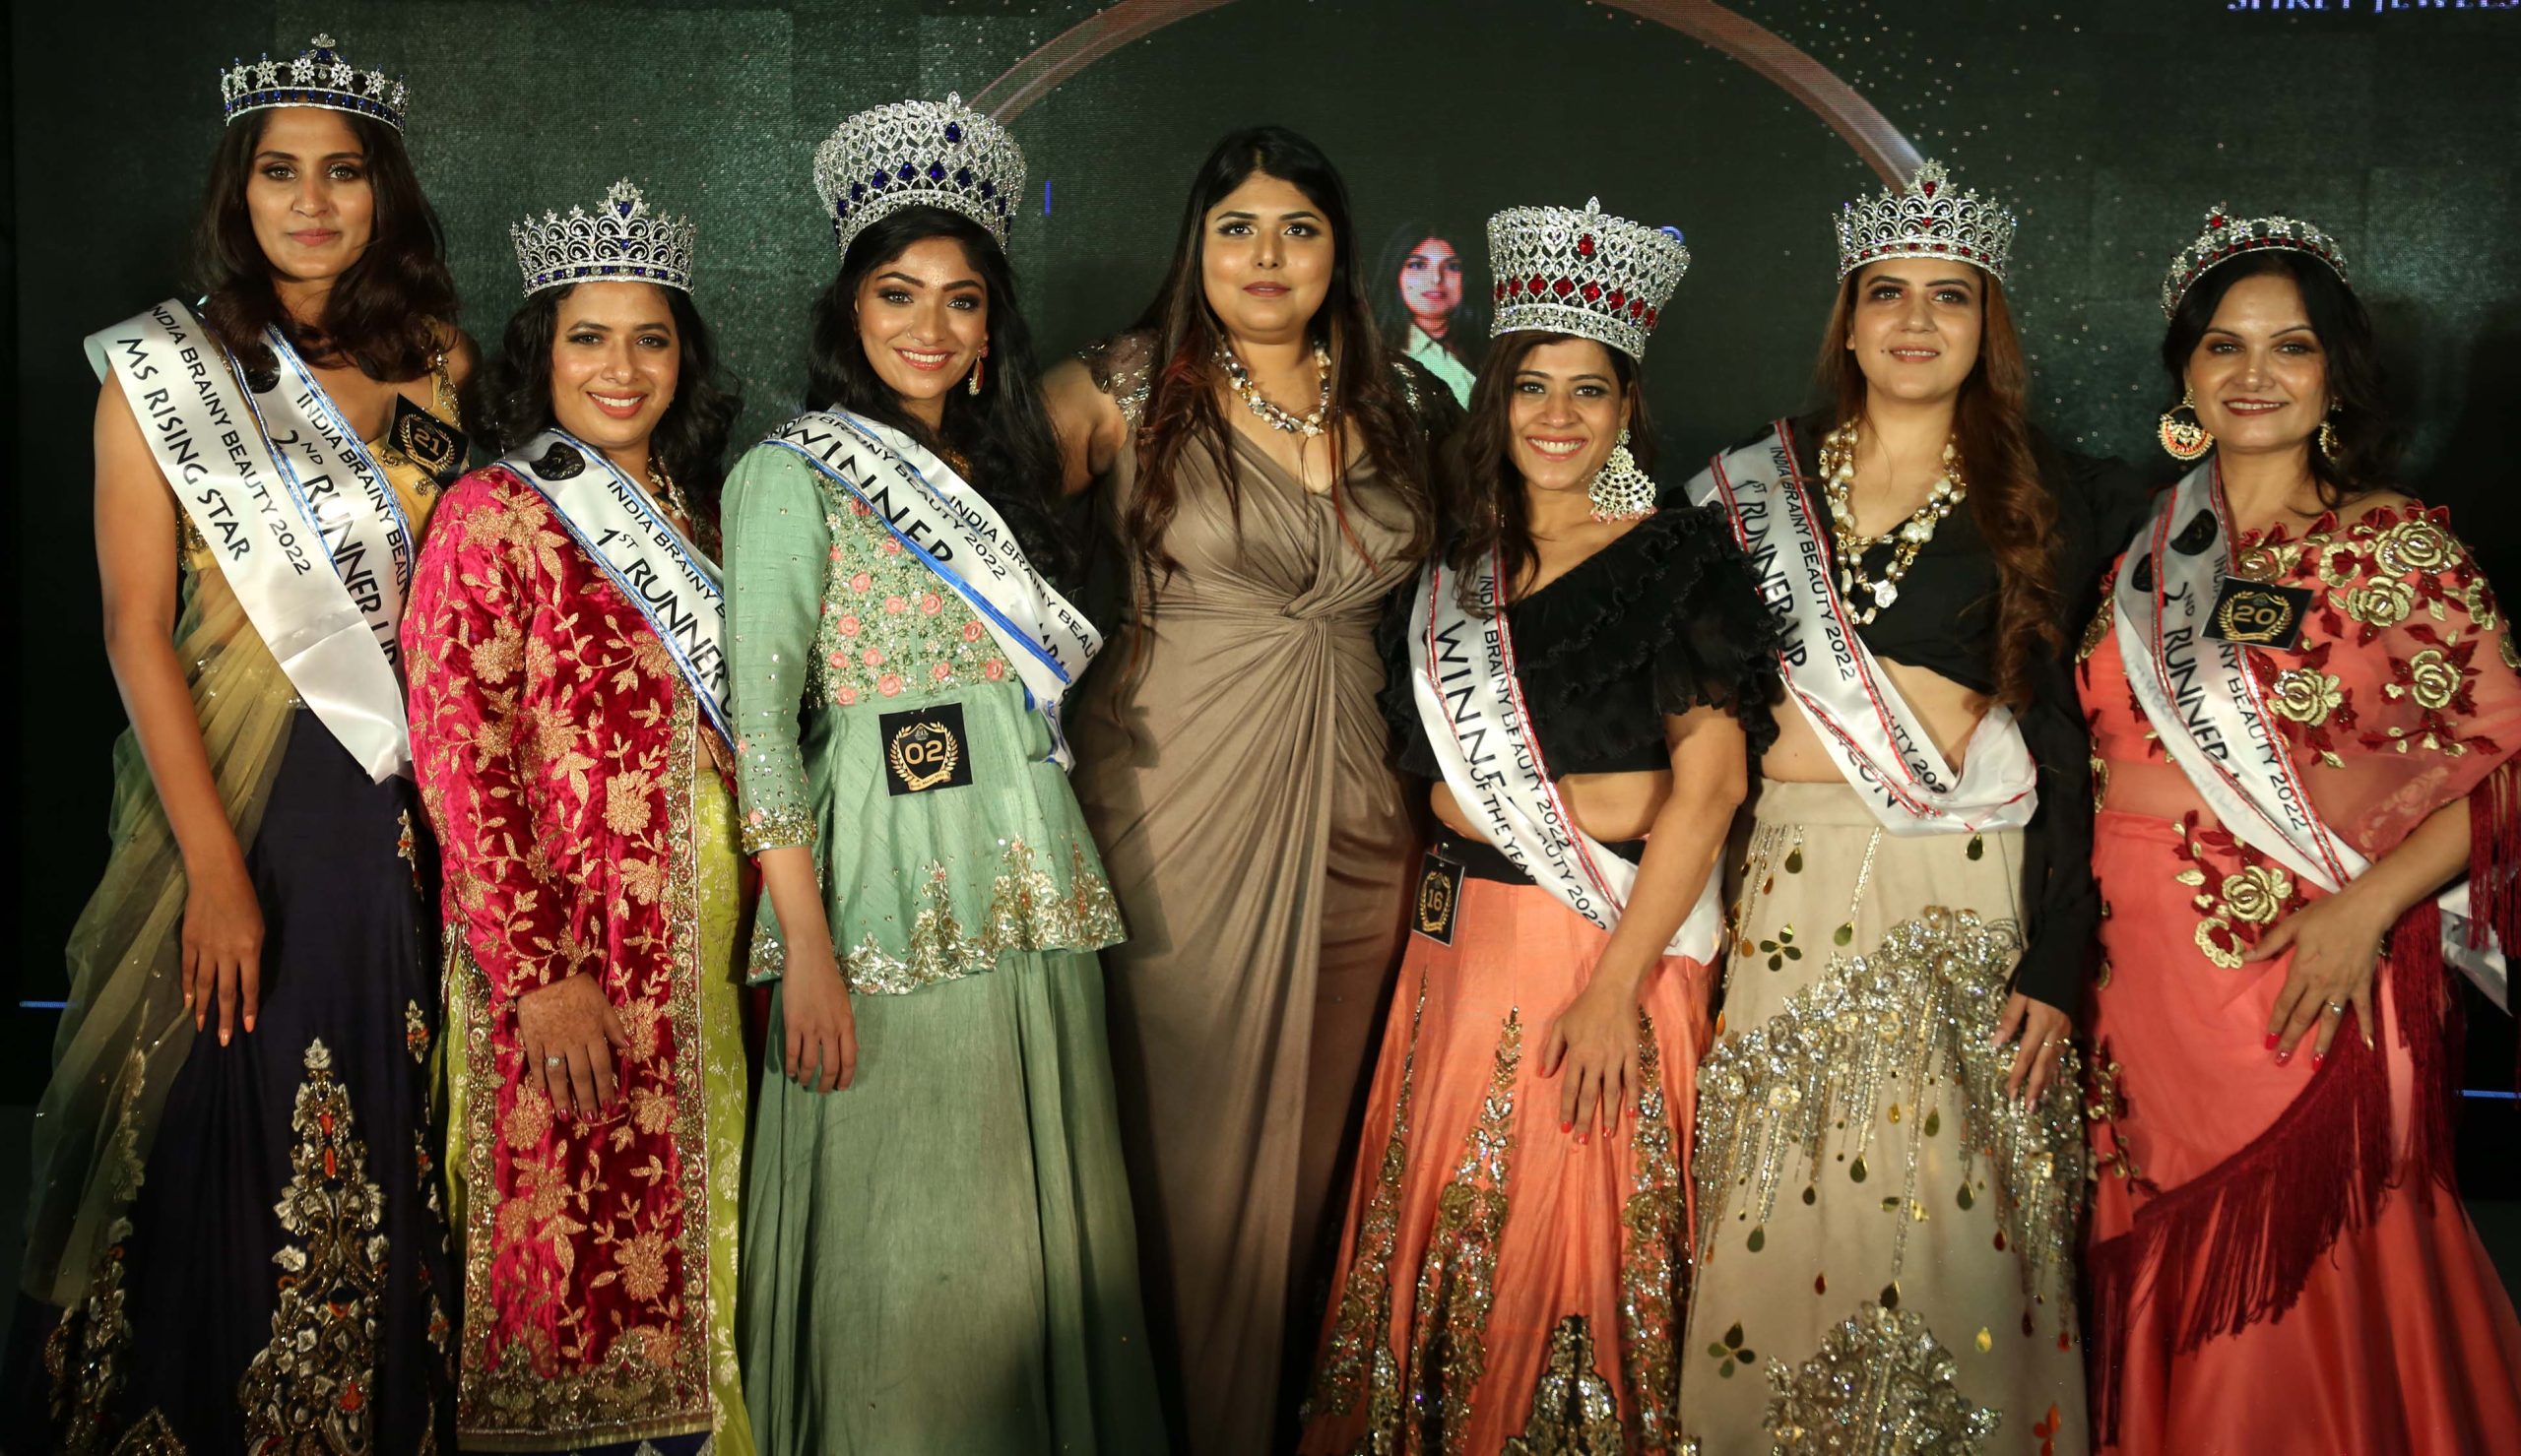 Women empowerment and supporting LGBTQ community, the motto behind India Brainy Beauty 2022 pageant!